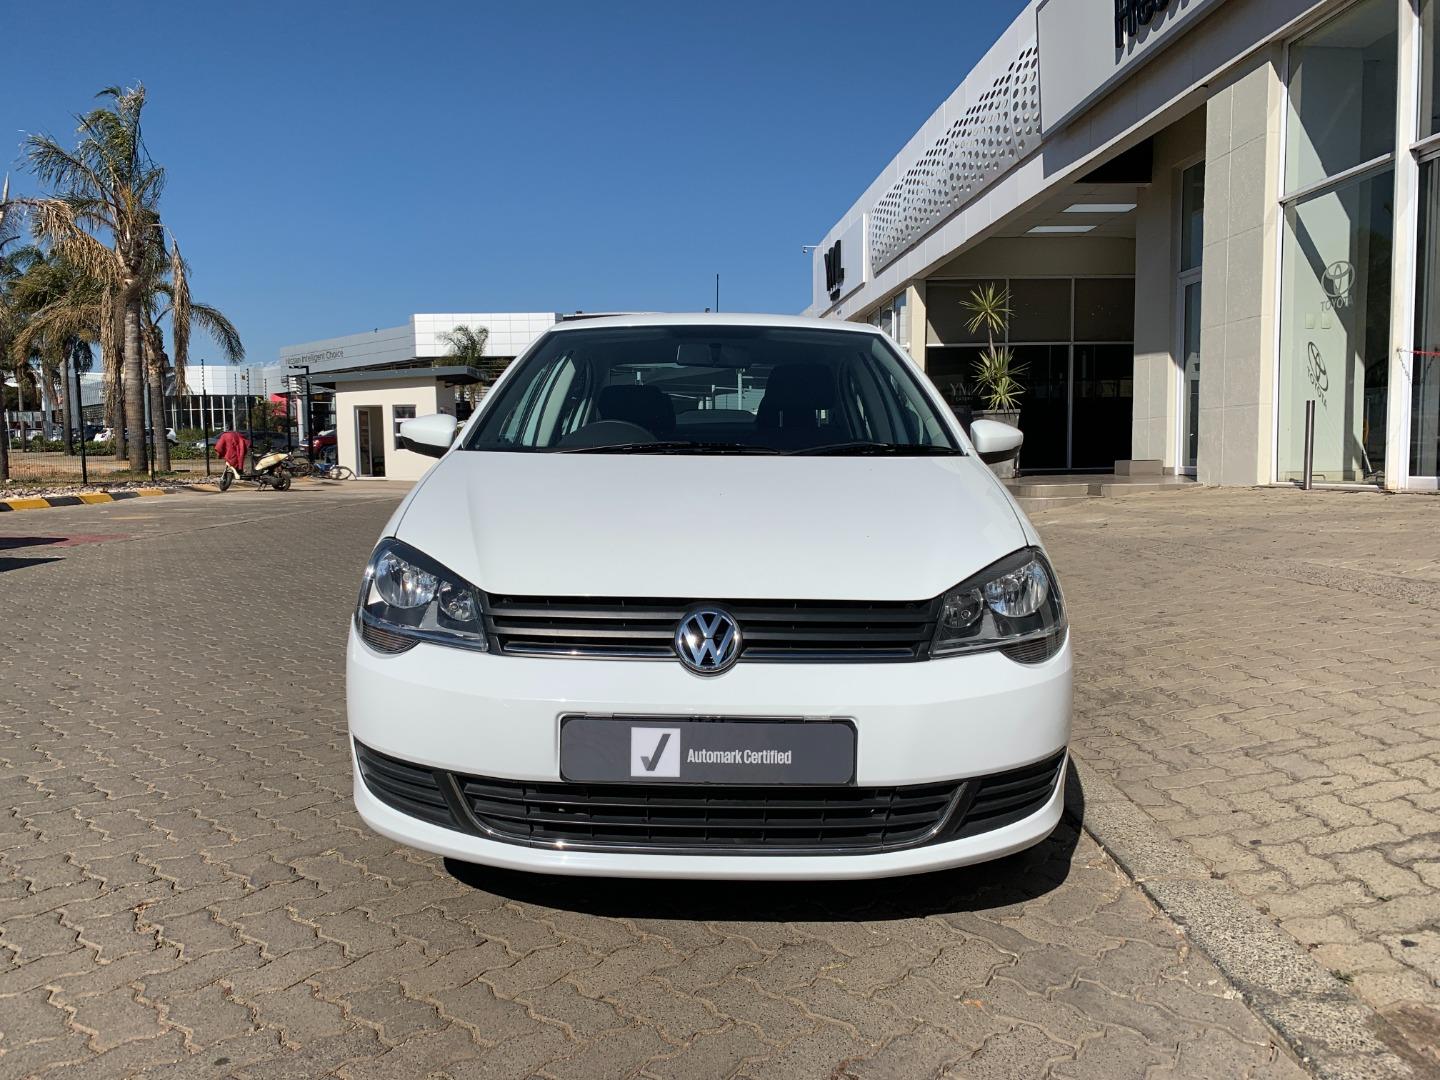 Volkswagen Polo Vivo Hatch 2015 for sale in , Johannesburg South